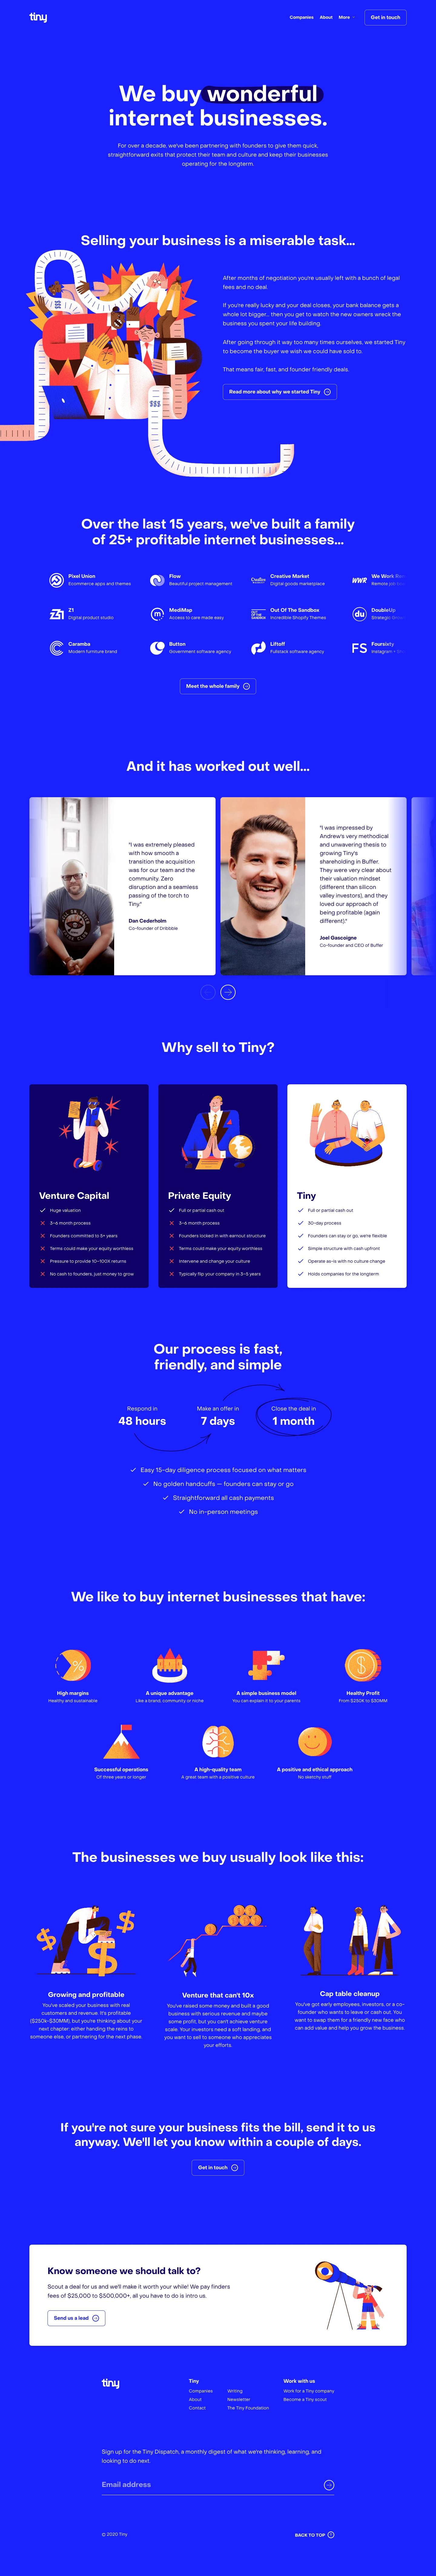 Tiny Landing Page Example: We buy wonderful internet businesses. For over a decade, we've been partnering with founders to give them quick, straightforward exits that protect their team and culture and keep their businesses operating for the longterm.